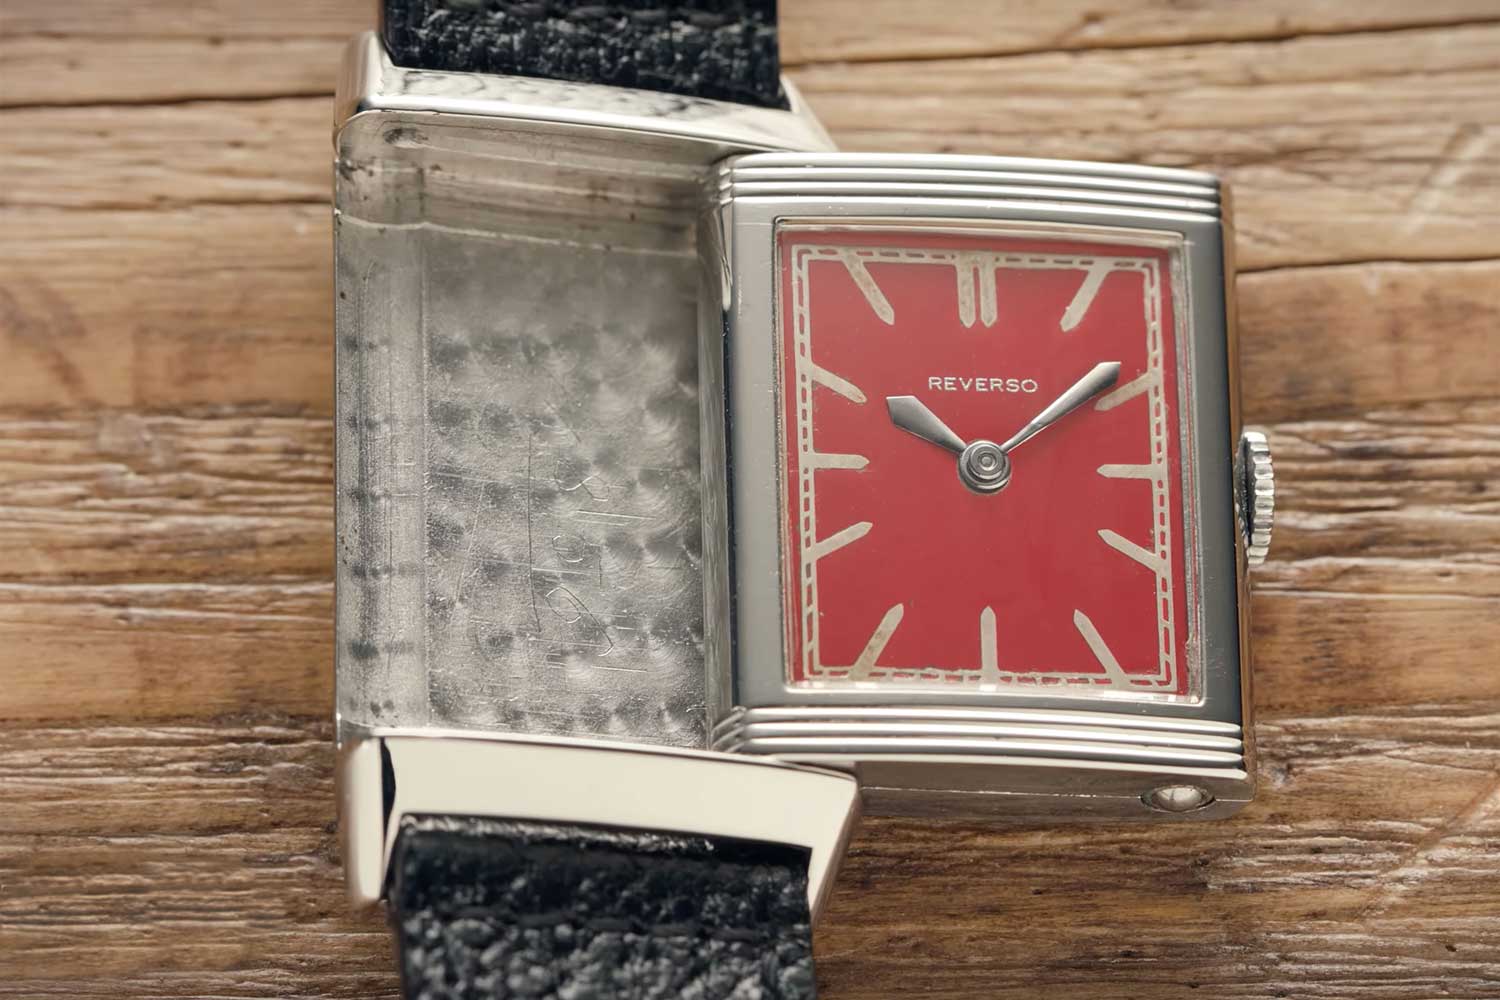 The Reverso’s revival in the thick of the quartz crisis demonstrated Jaeger-LeCoultre’s plucky ability to think differently.